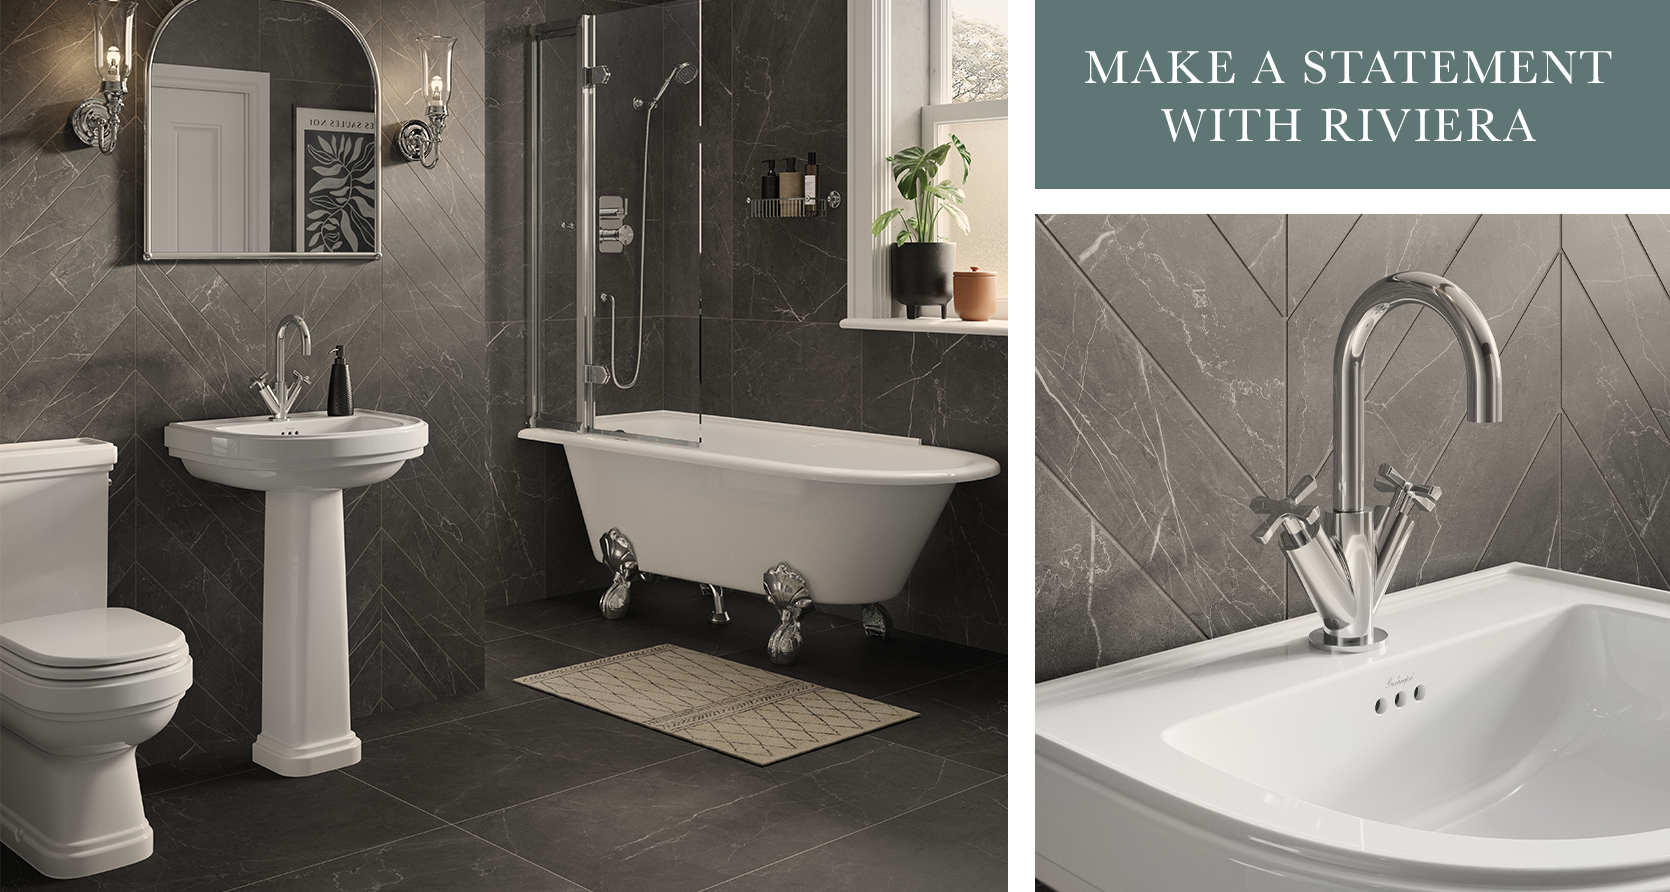 Art Deco bathroom | Capture a timeless Art Deco bathroom suite with the Riviera collection